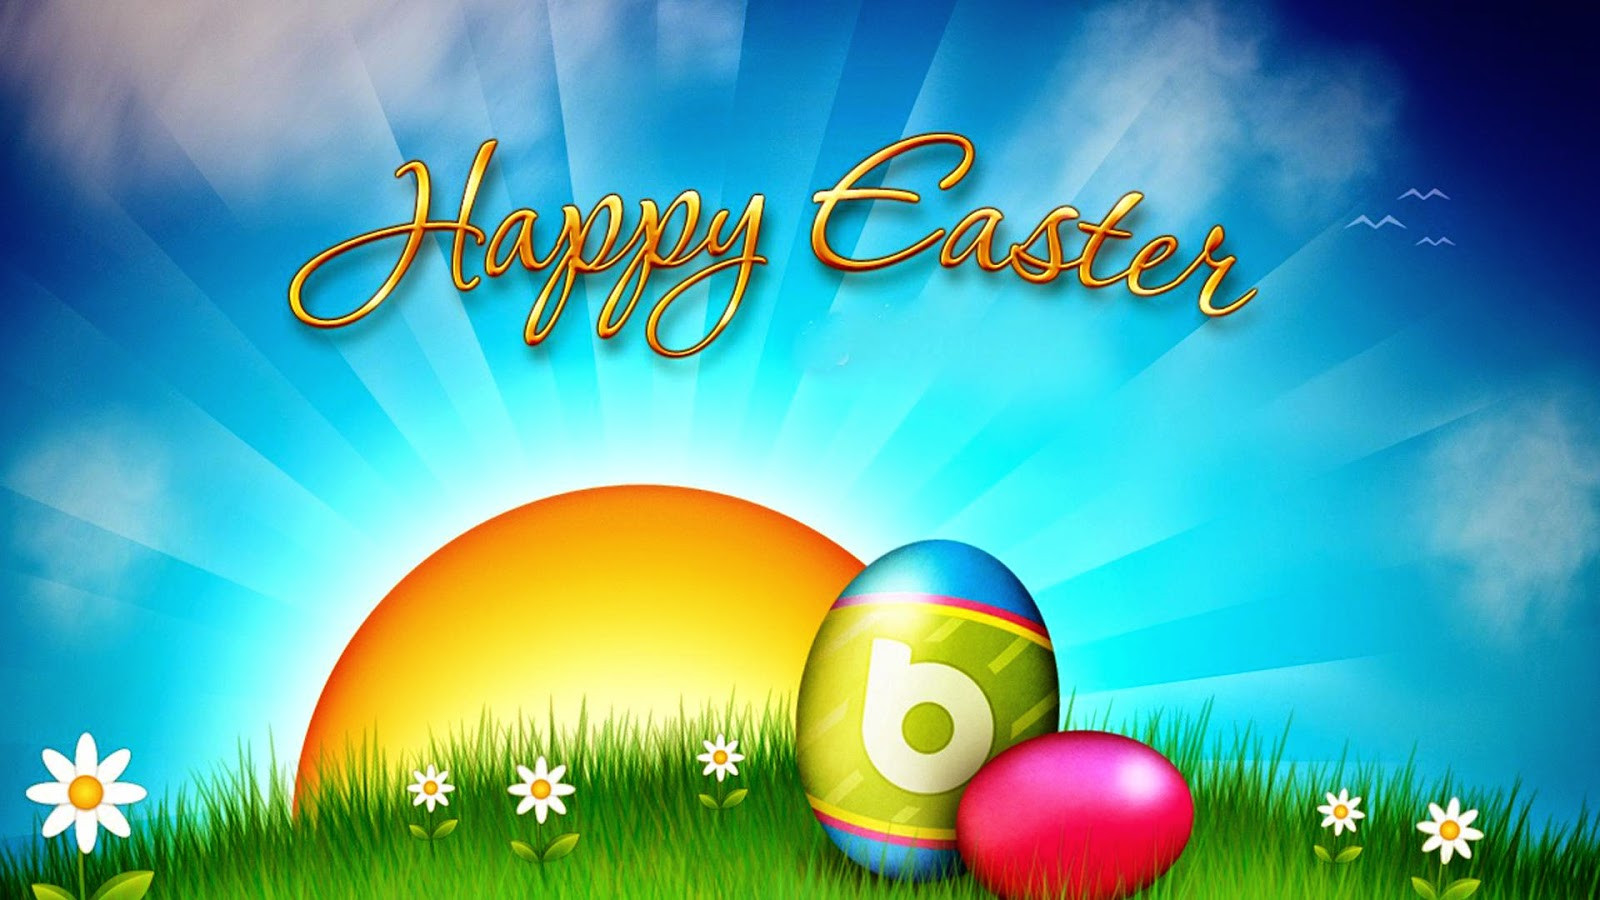 Happy Easter Quotes
 Quotes About Easter QuotesGram